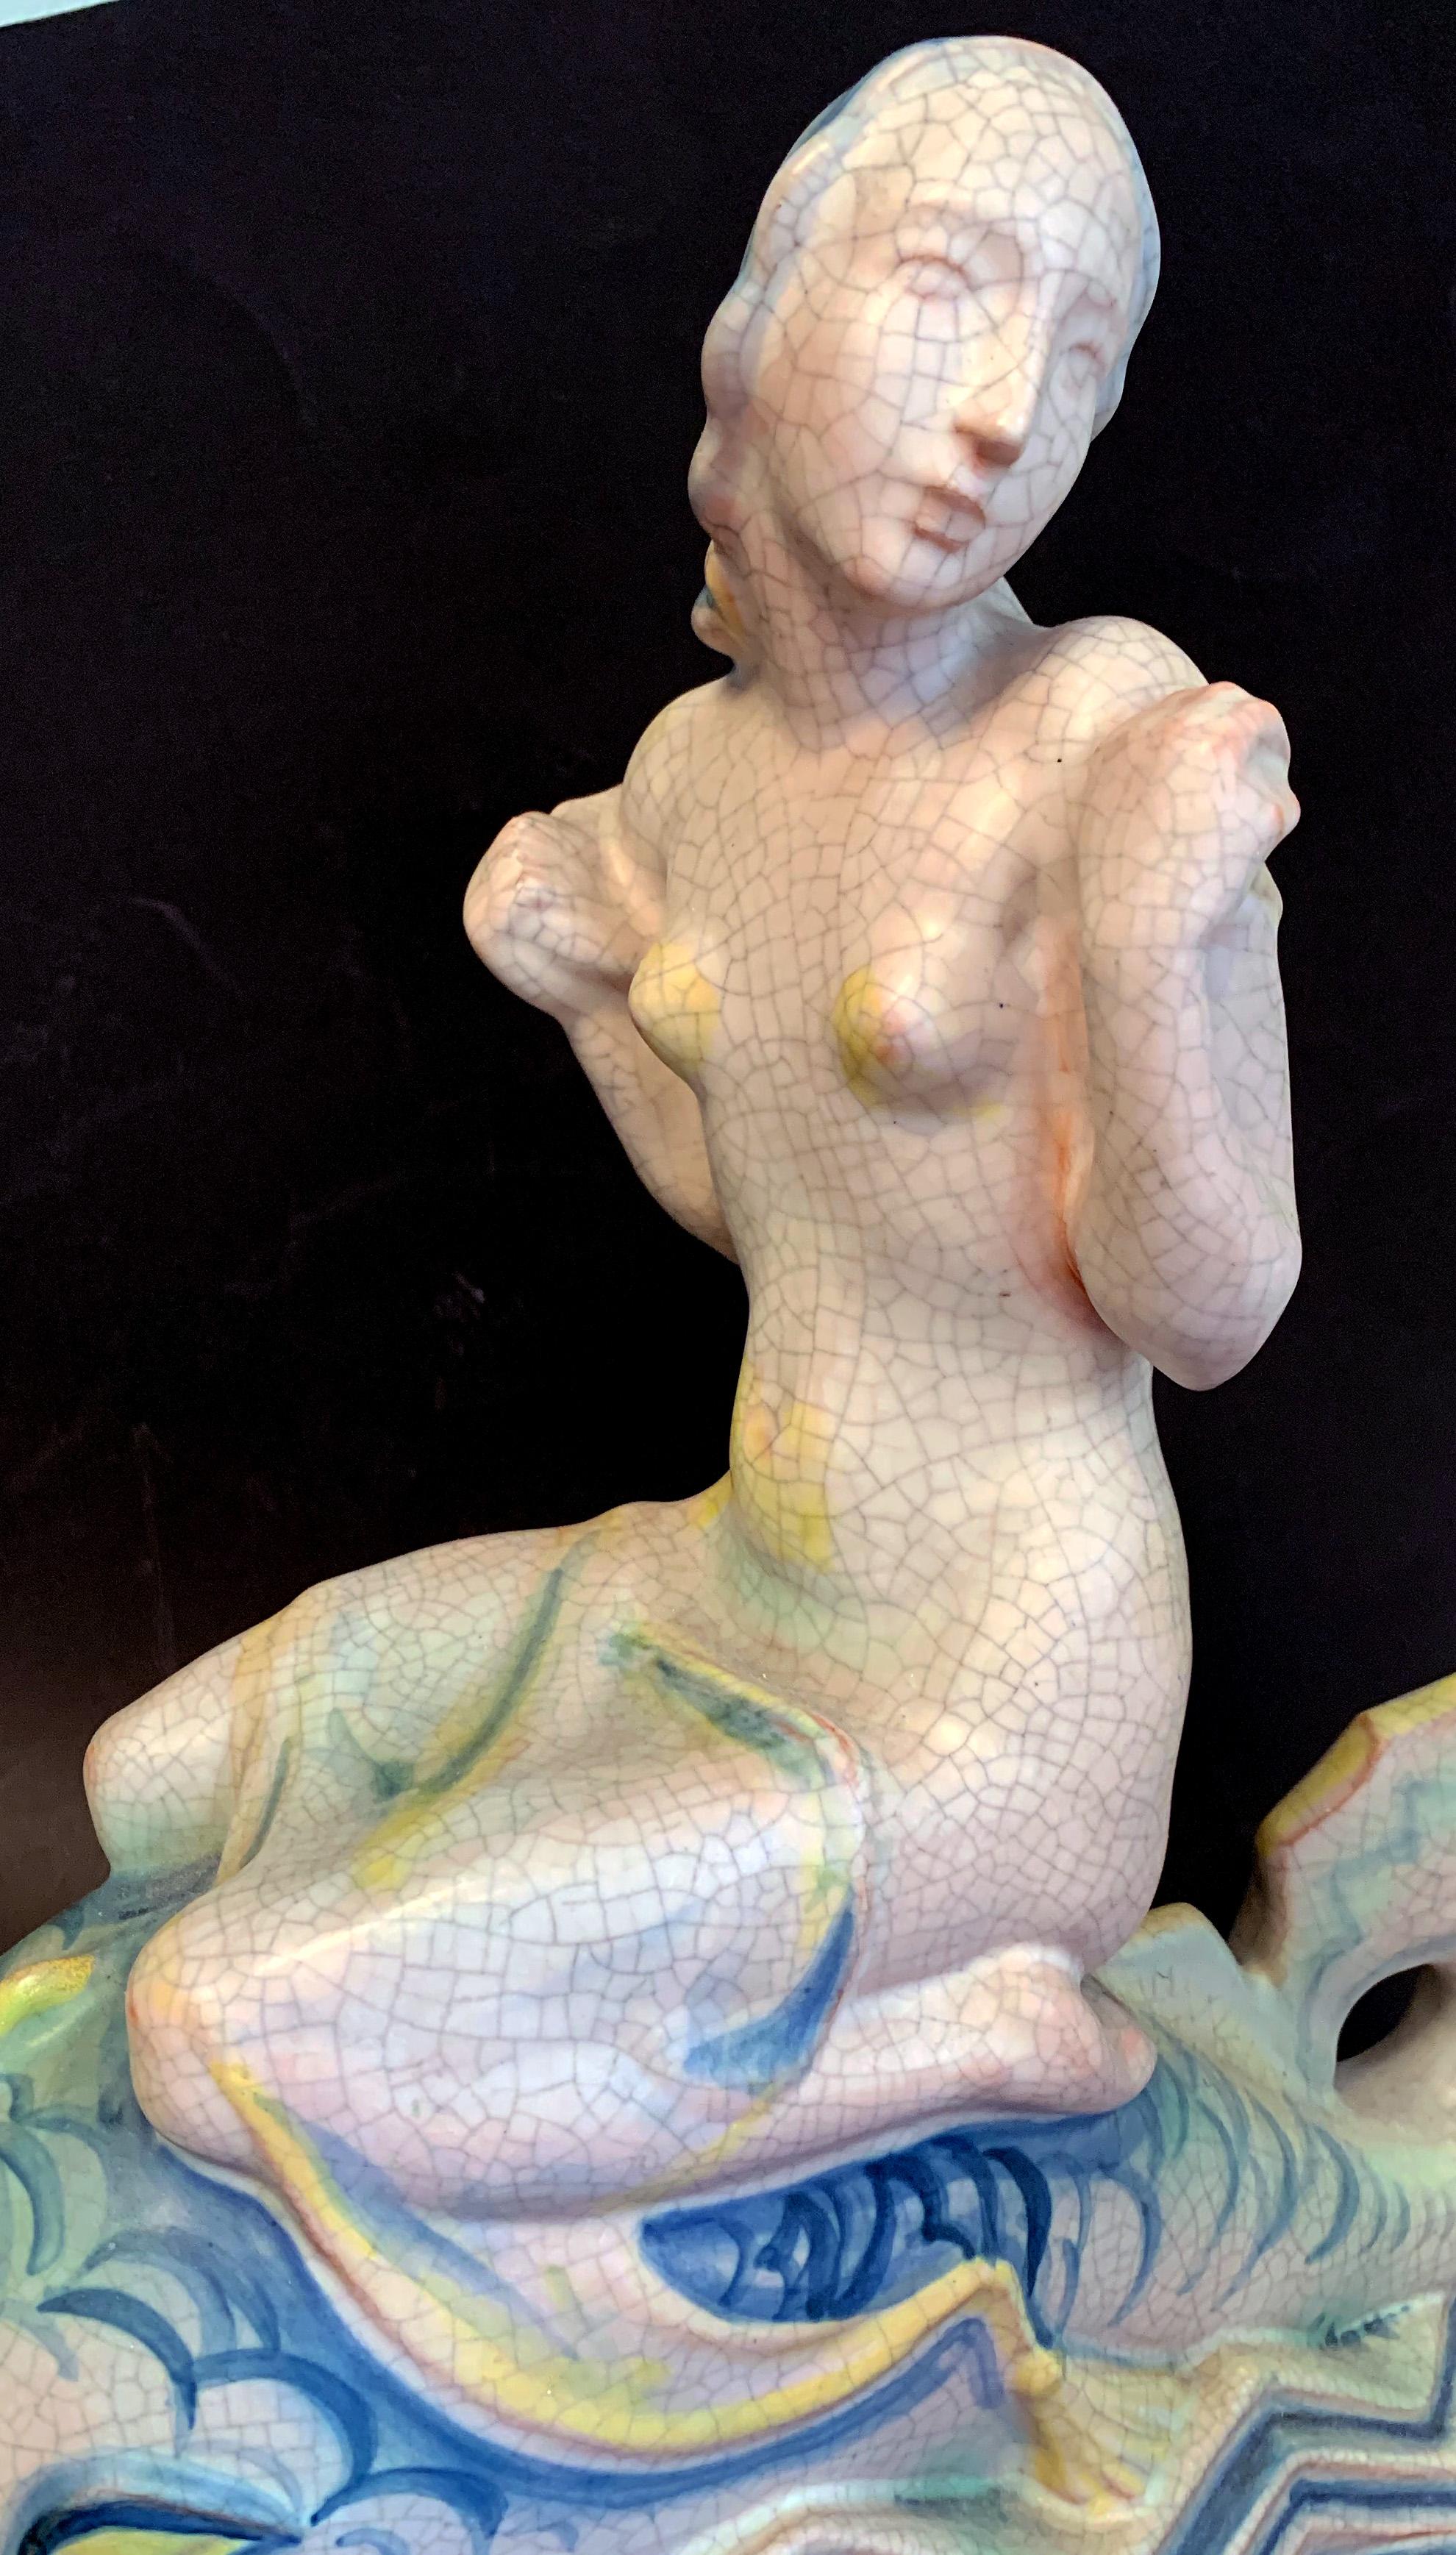 Stunning in its size, composition and rich glazes, this rare sculpture of a mermaid riding on a dolphin in an Art Deco, zigzag sea was crafted by Kieler Kunst-Keramic in Kiel, Germany in the mid-1920s. Known by Art Deco collectors for its exquisite